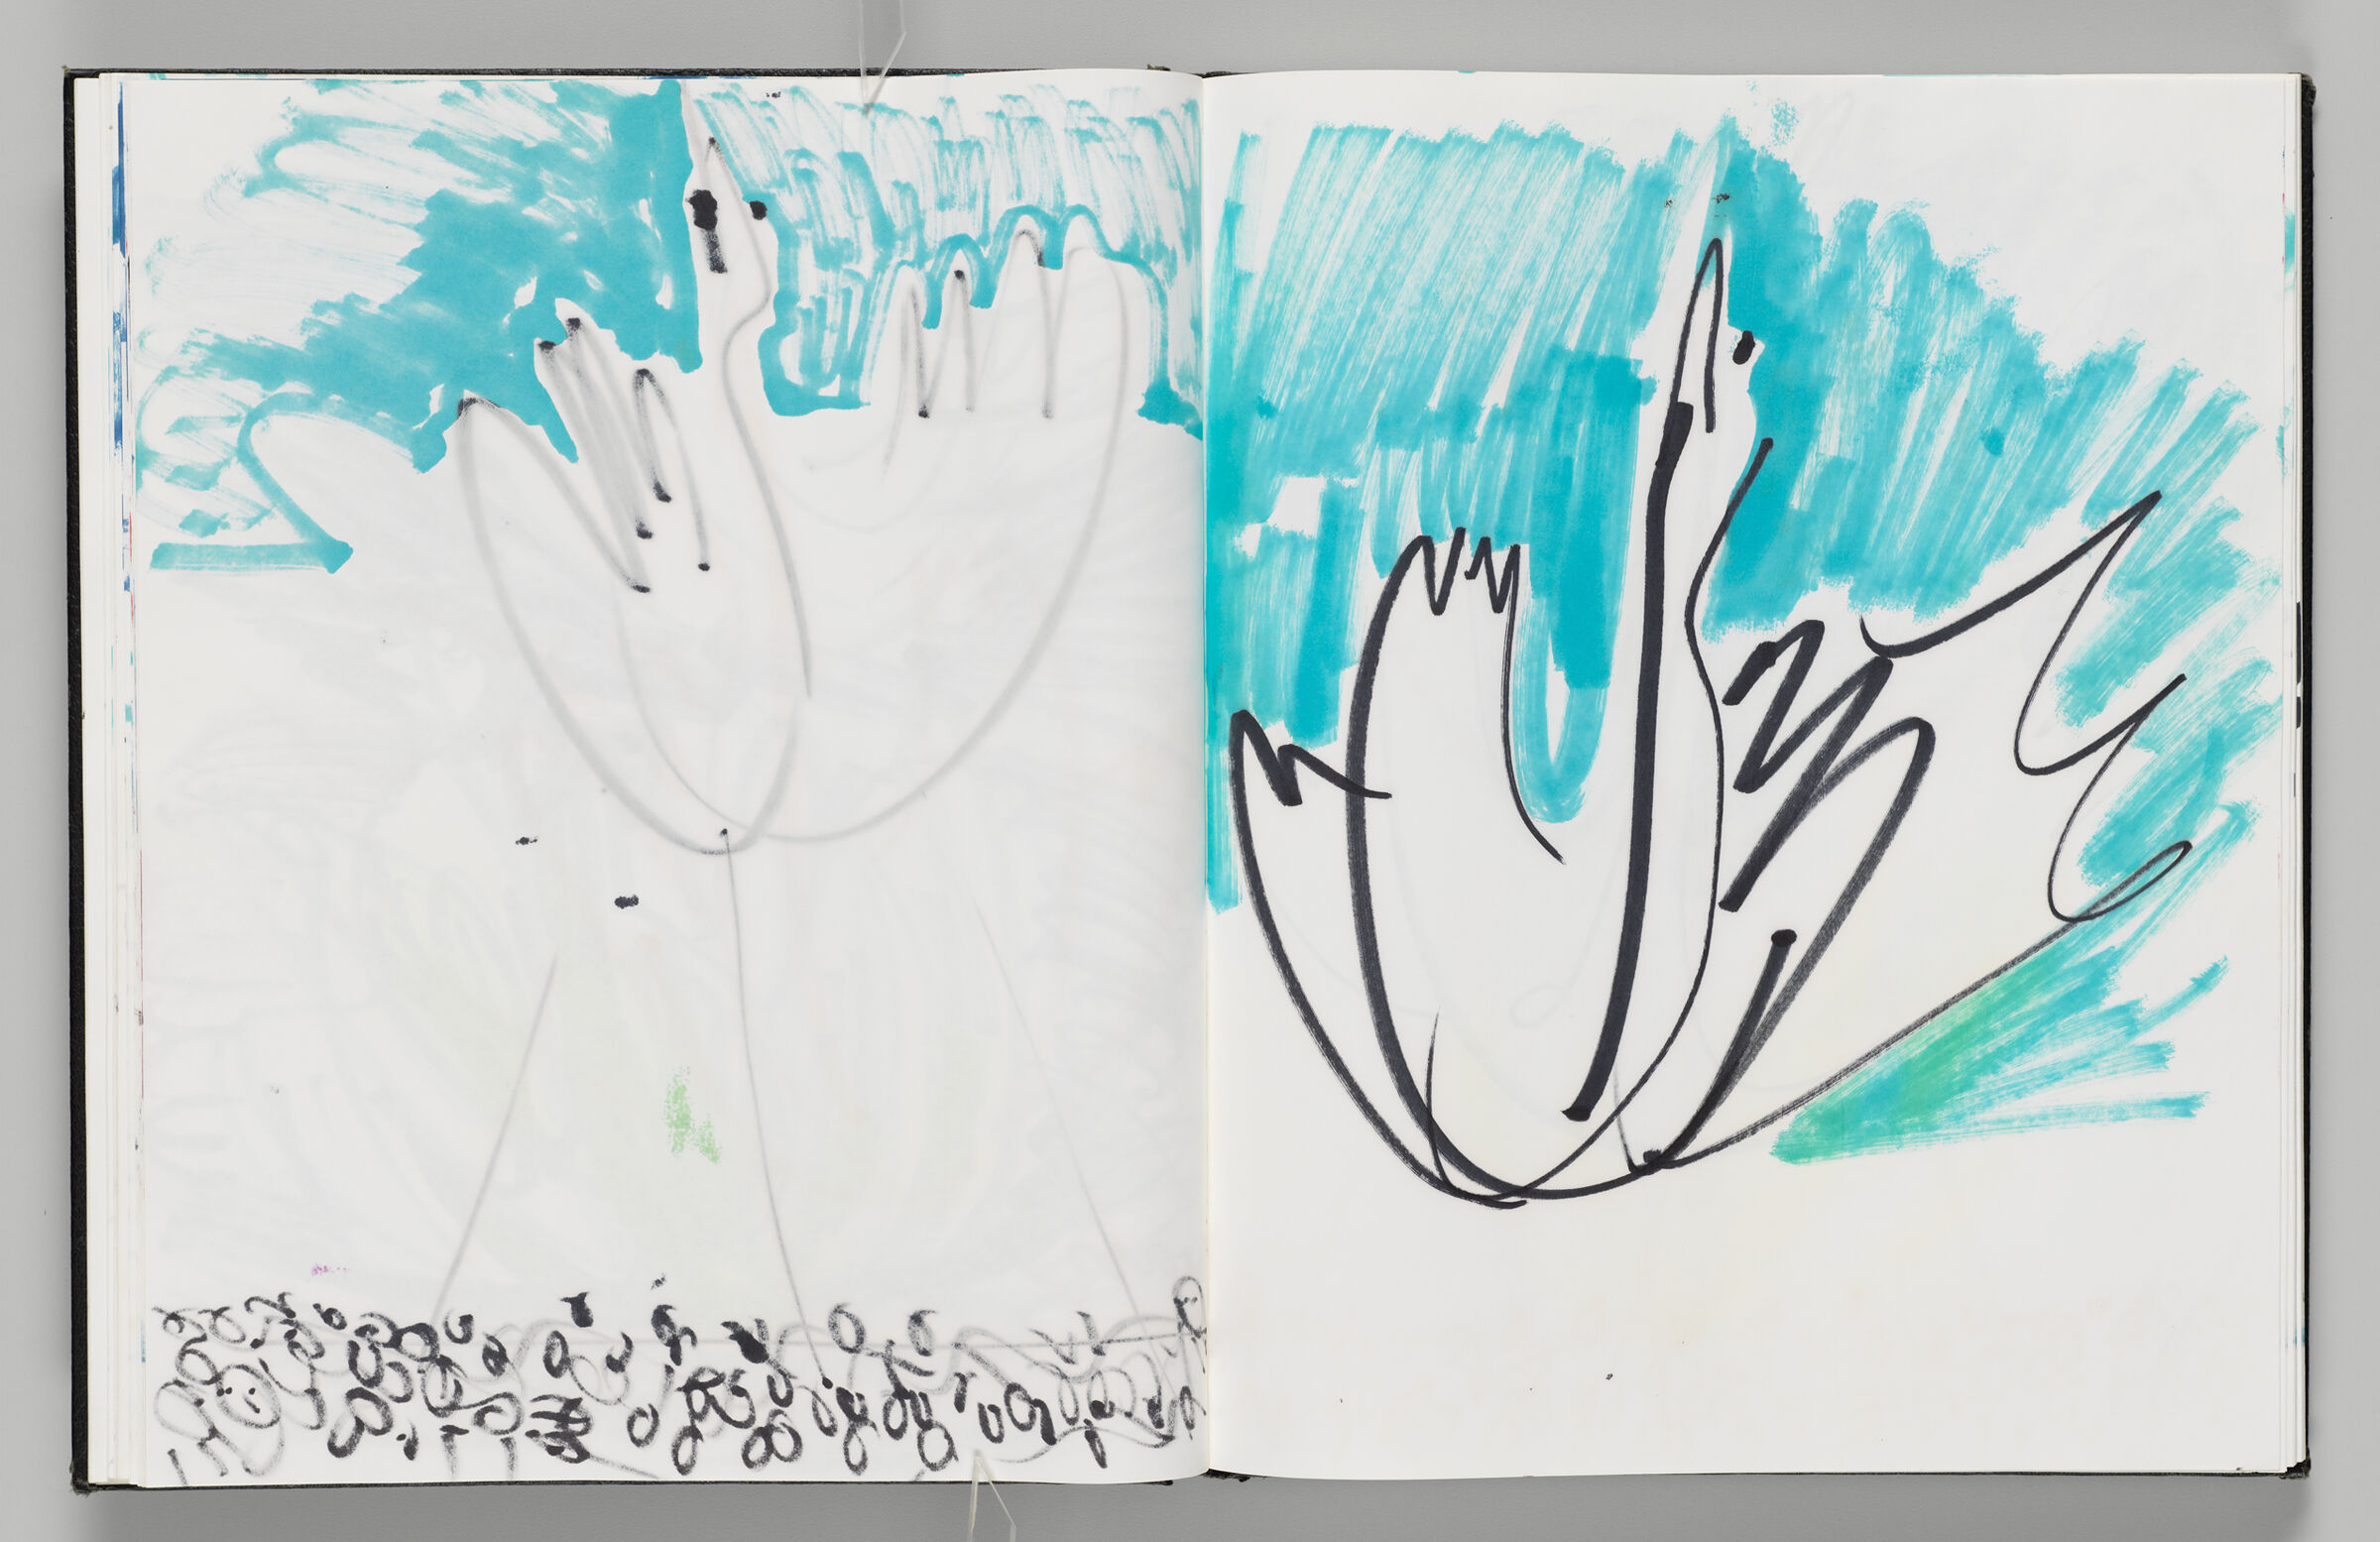 Untitled (Bleed-Through Of Previous Page, Left Page); Untitled (Swan In Sky, Right Page)